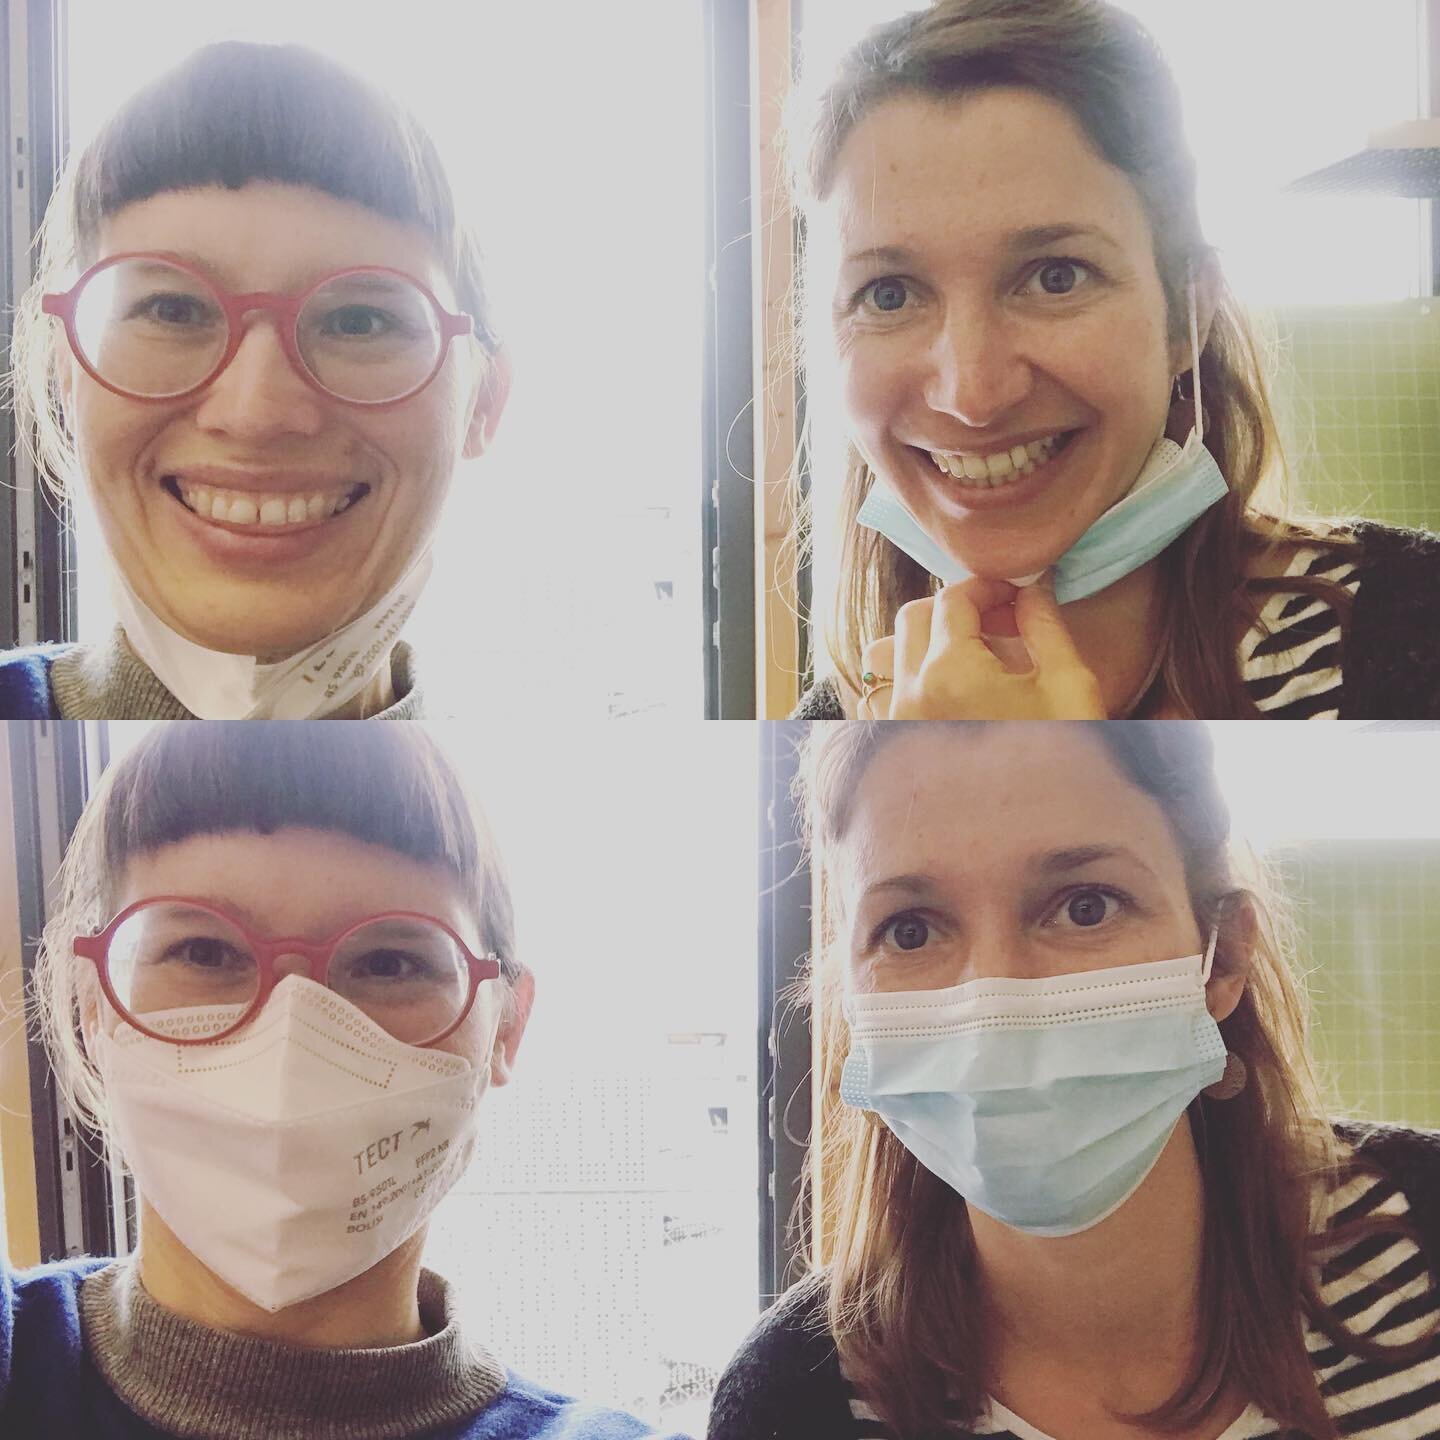 So happy to work in reality, 3D, Person-to-Person! 
.
Natalia (left) and Ruth (right) @Freitag
.
#notonline #lovework